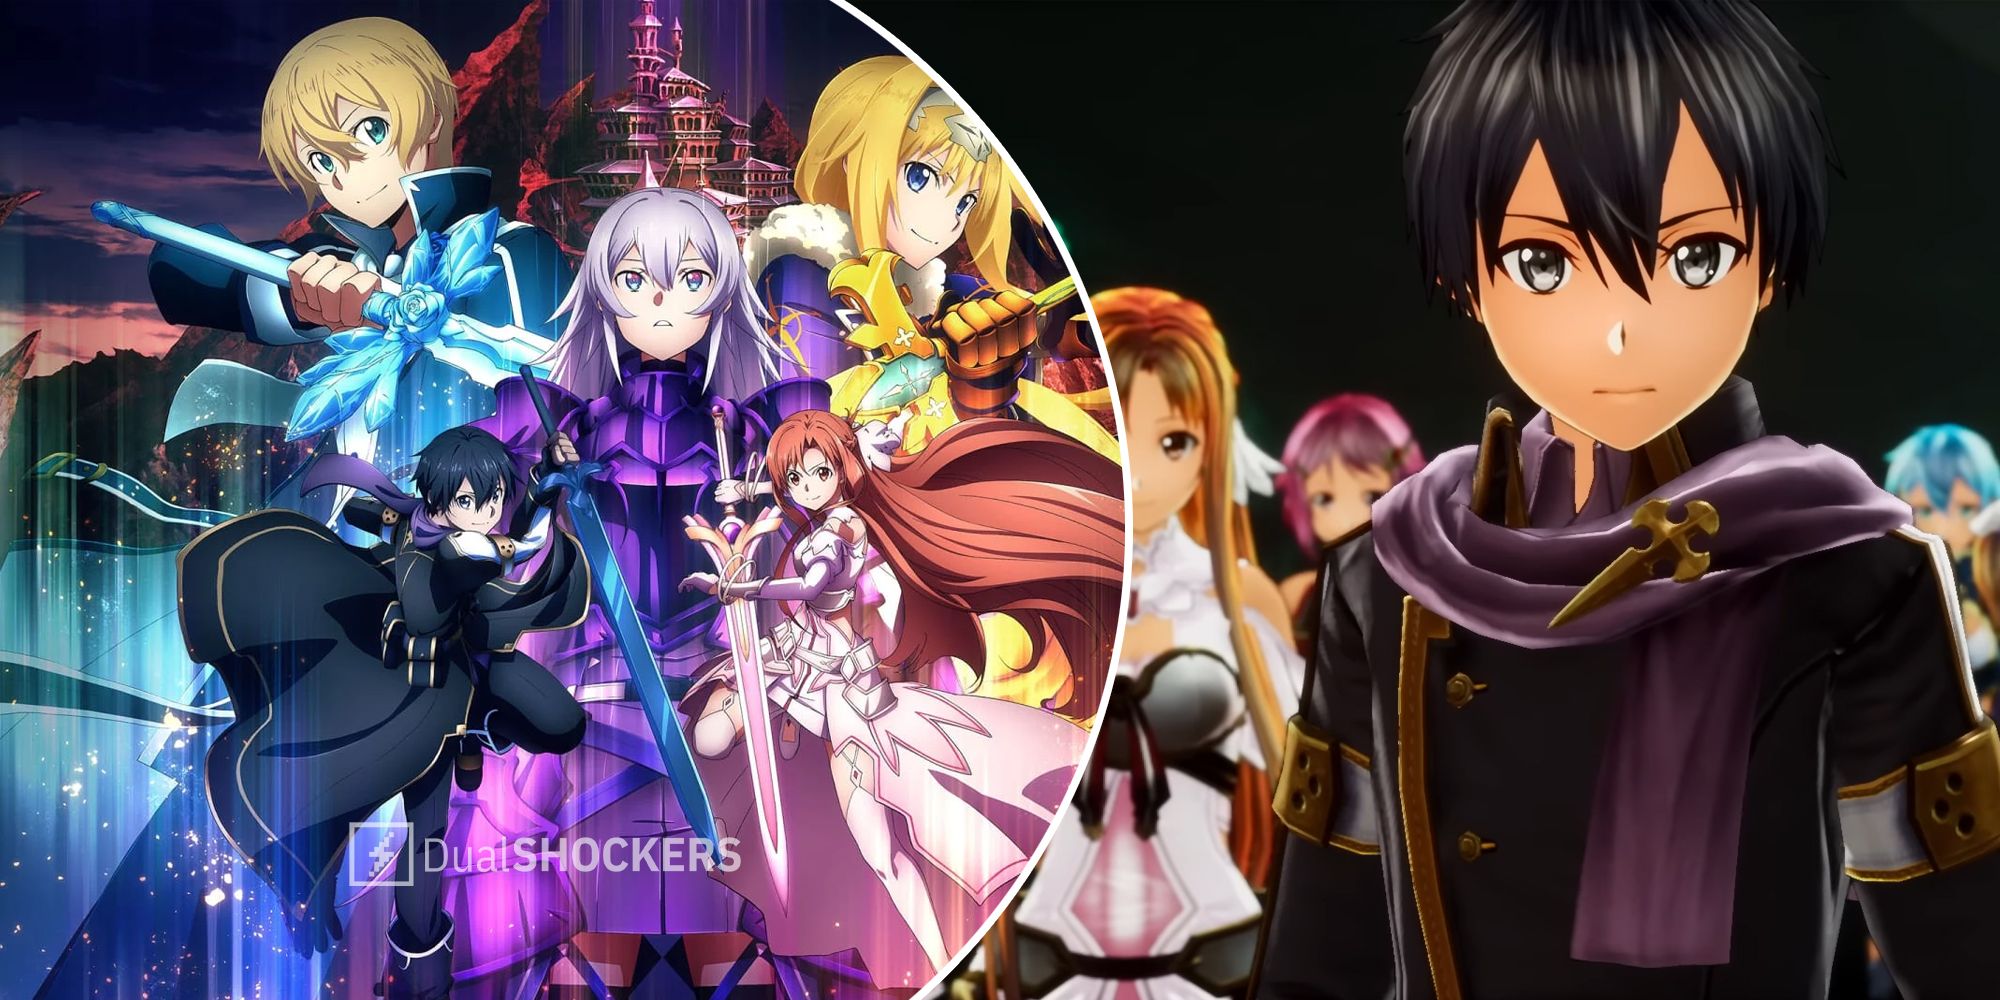 New Sword Art Online Video Game Confirmed for 2023 - Last Recollection